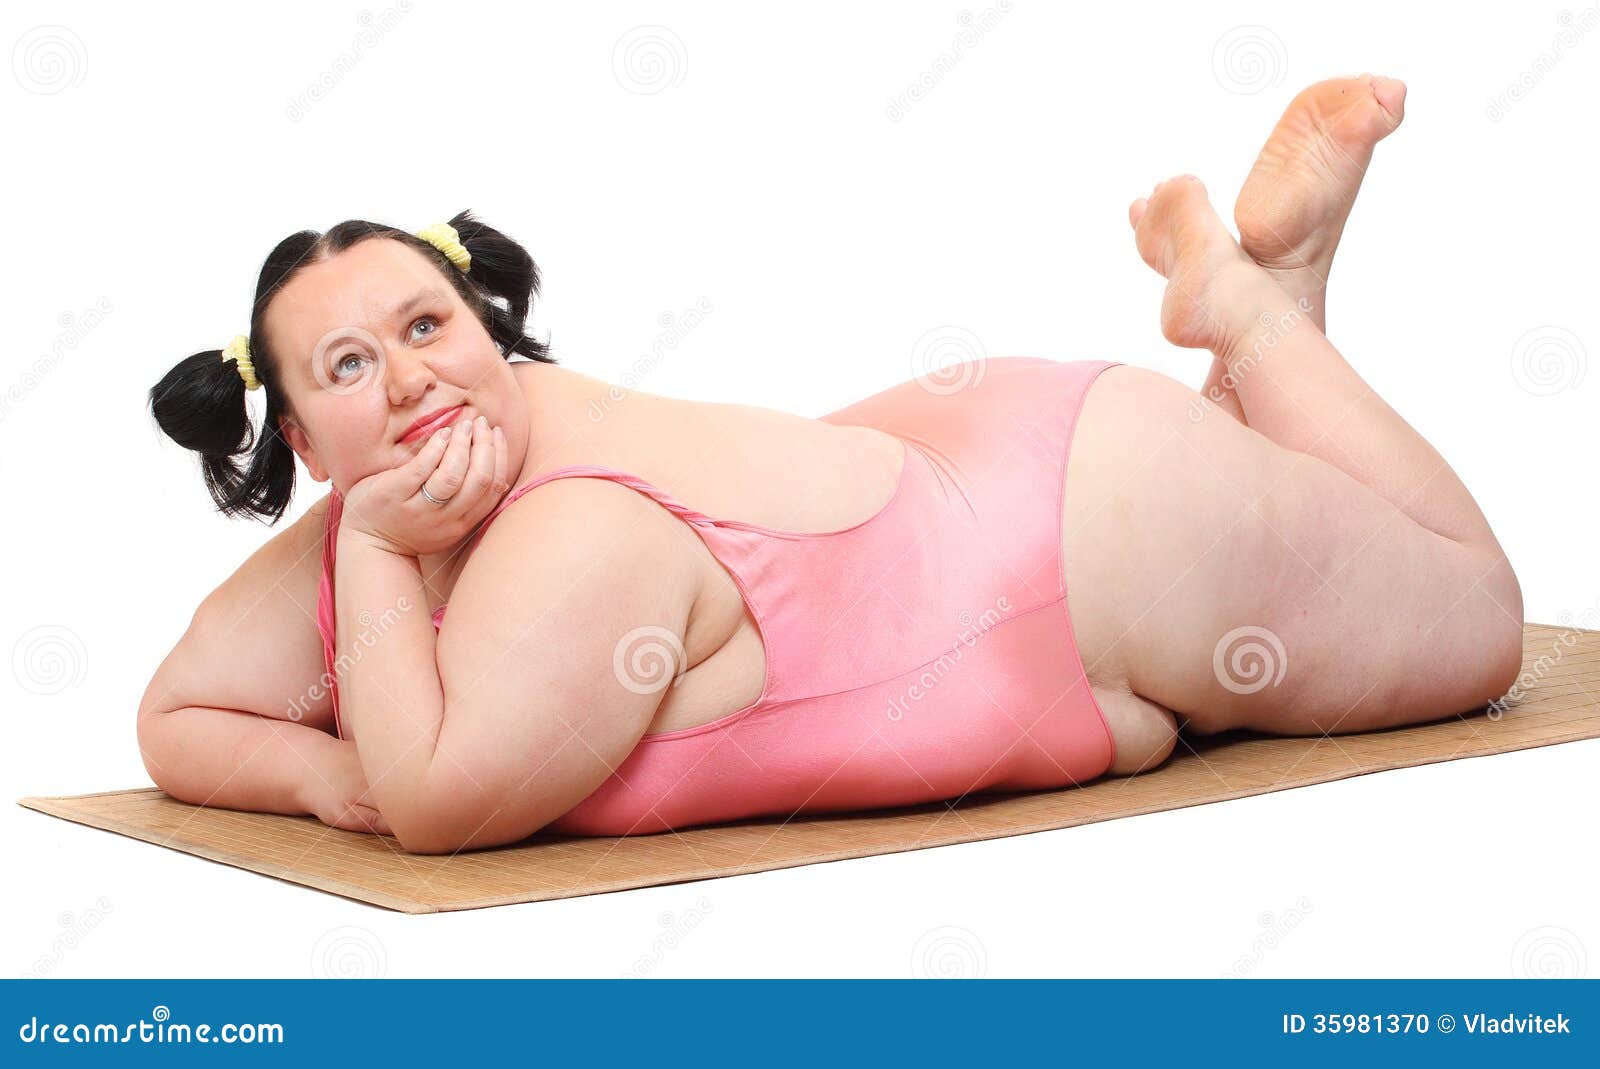 happy-overweight-woman-dressed-pink-swimsuit-lying-white-background-35981370.jpg